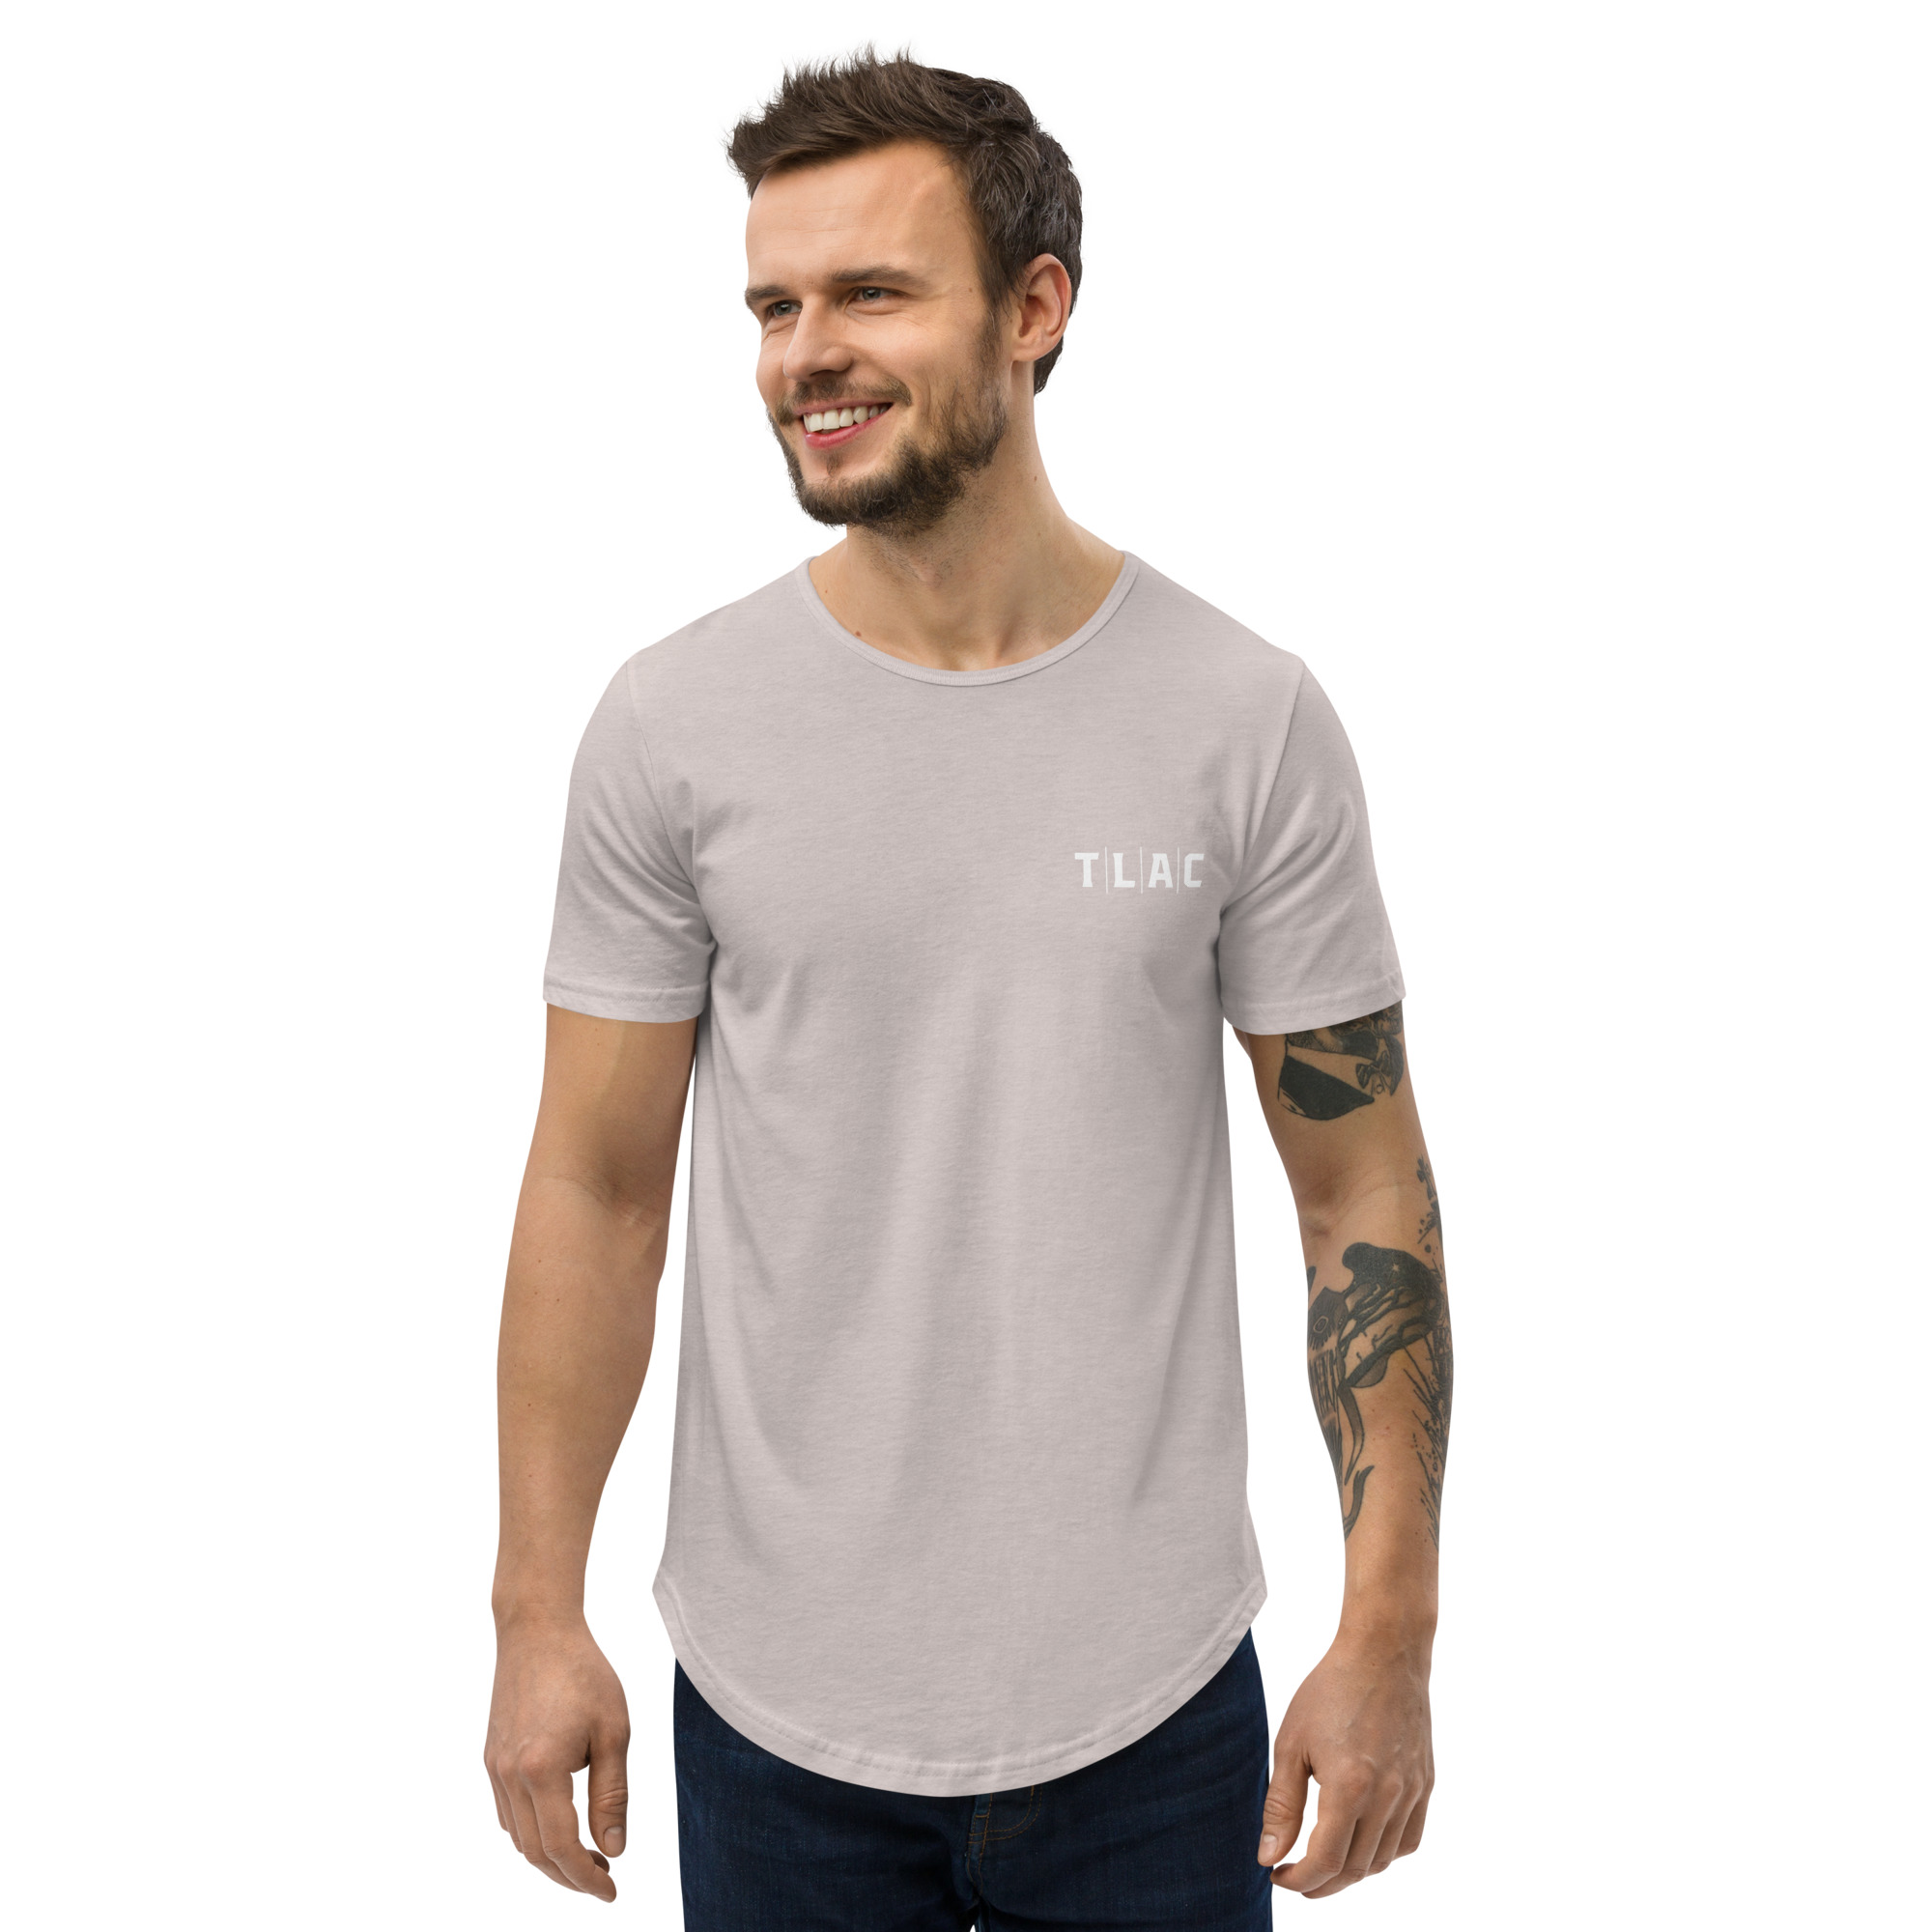 TLAC - Curved Hem T-Shirt (White Text)